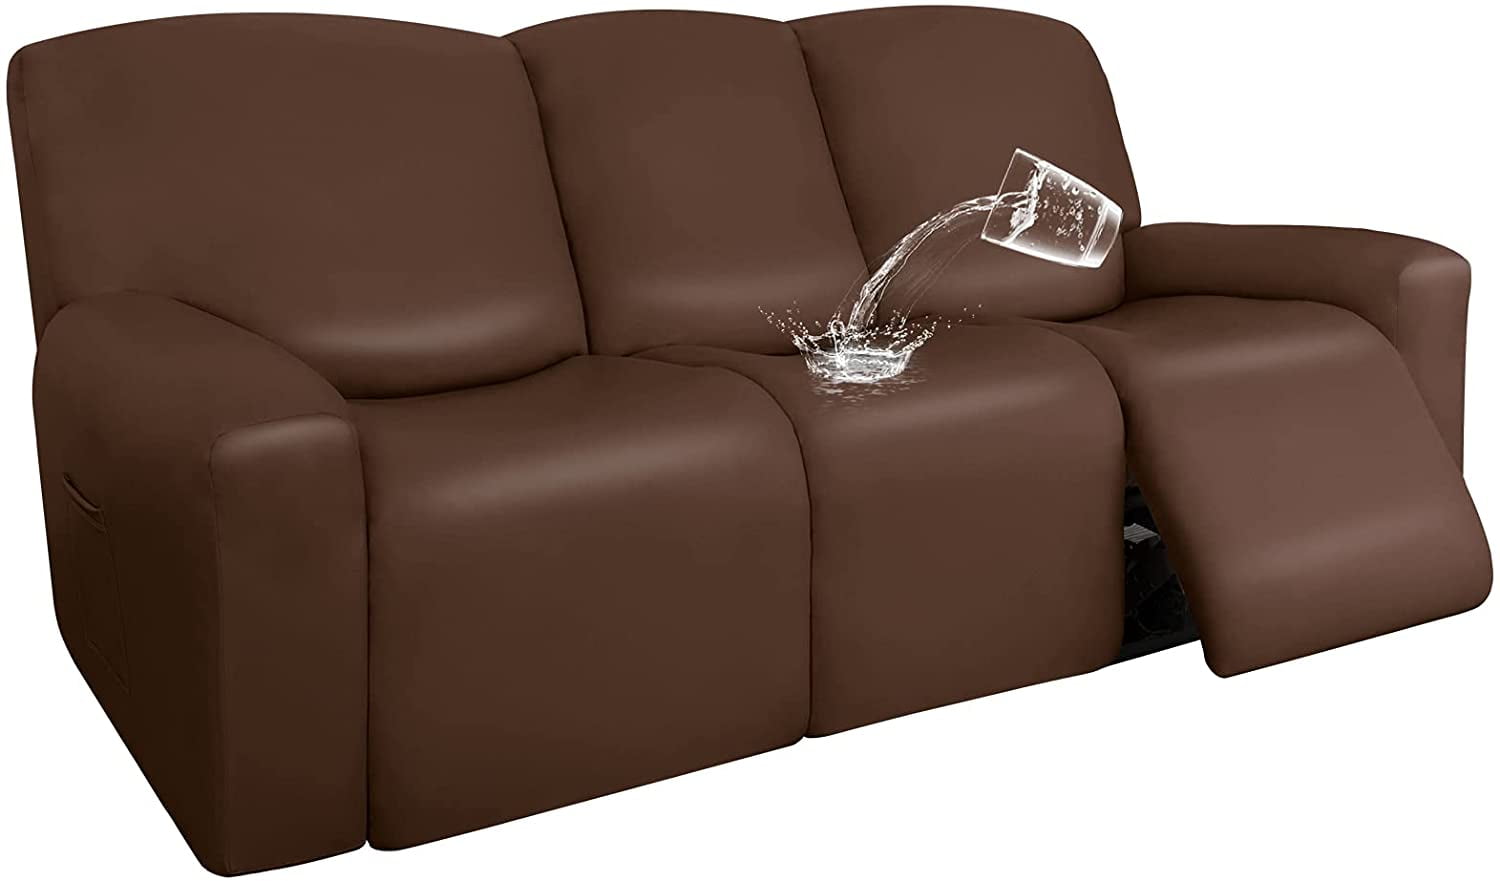 Pu Leather Recliner Sofa Slipcovers, How To Cover A Leather Recliner Sofa With Fabric